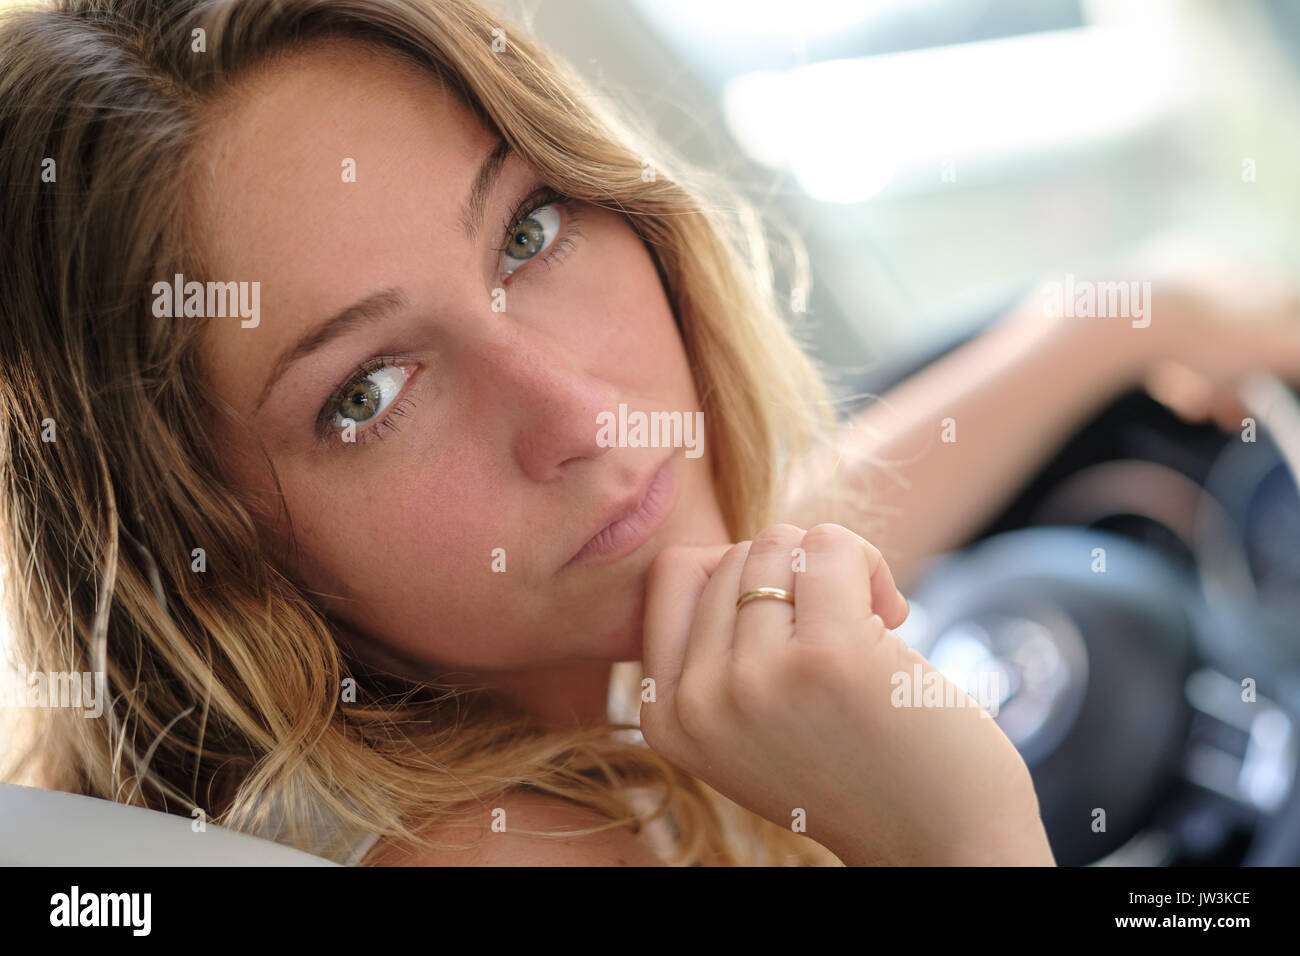 Portrait of woman in car driving Stock Photo